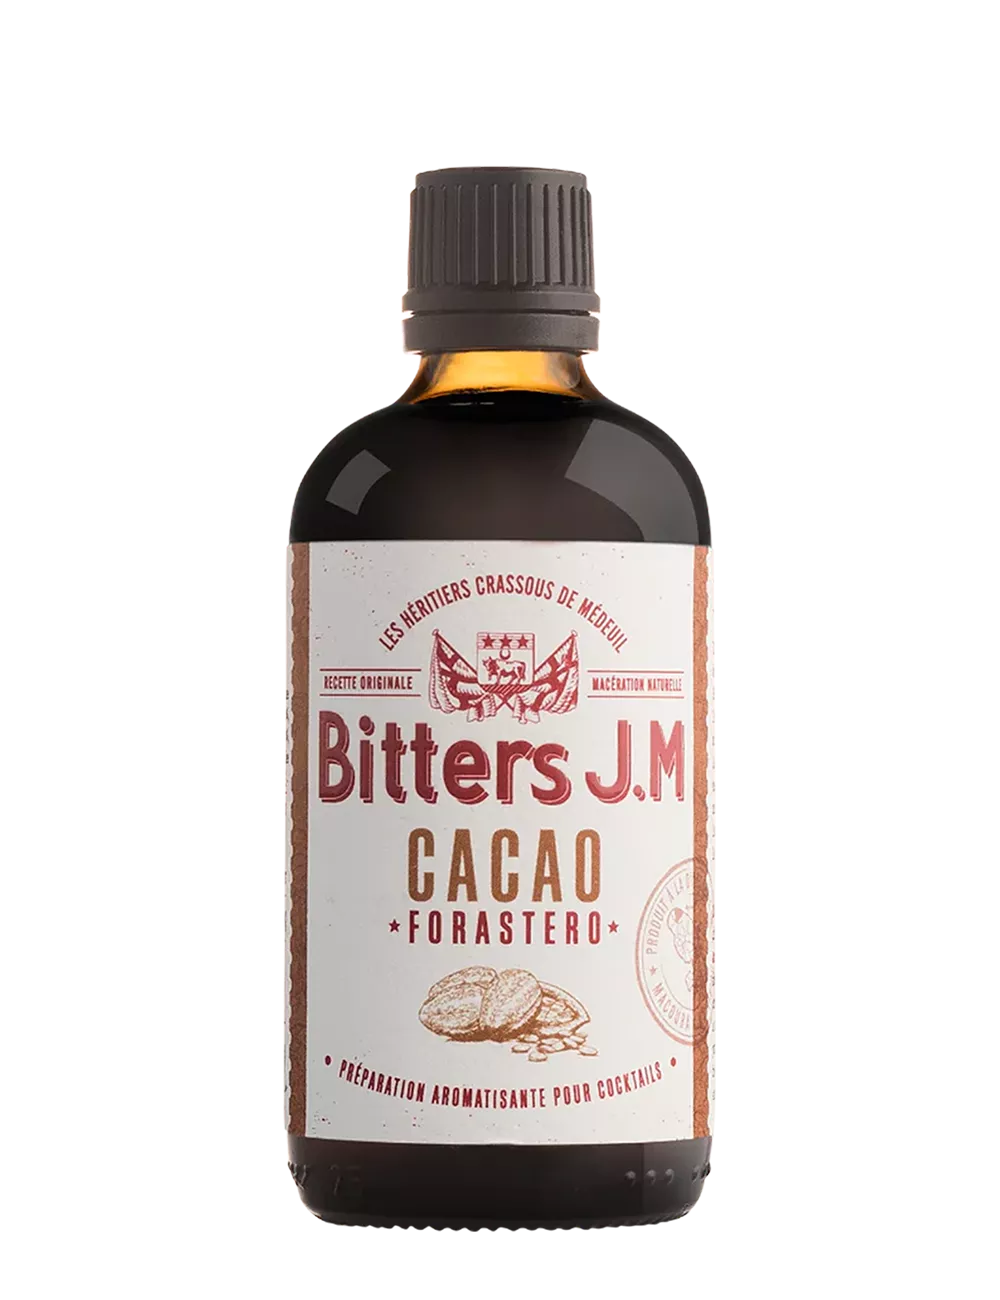 J.M - Cacao Forastero - Bitter